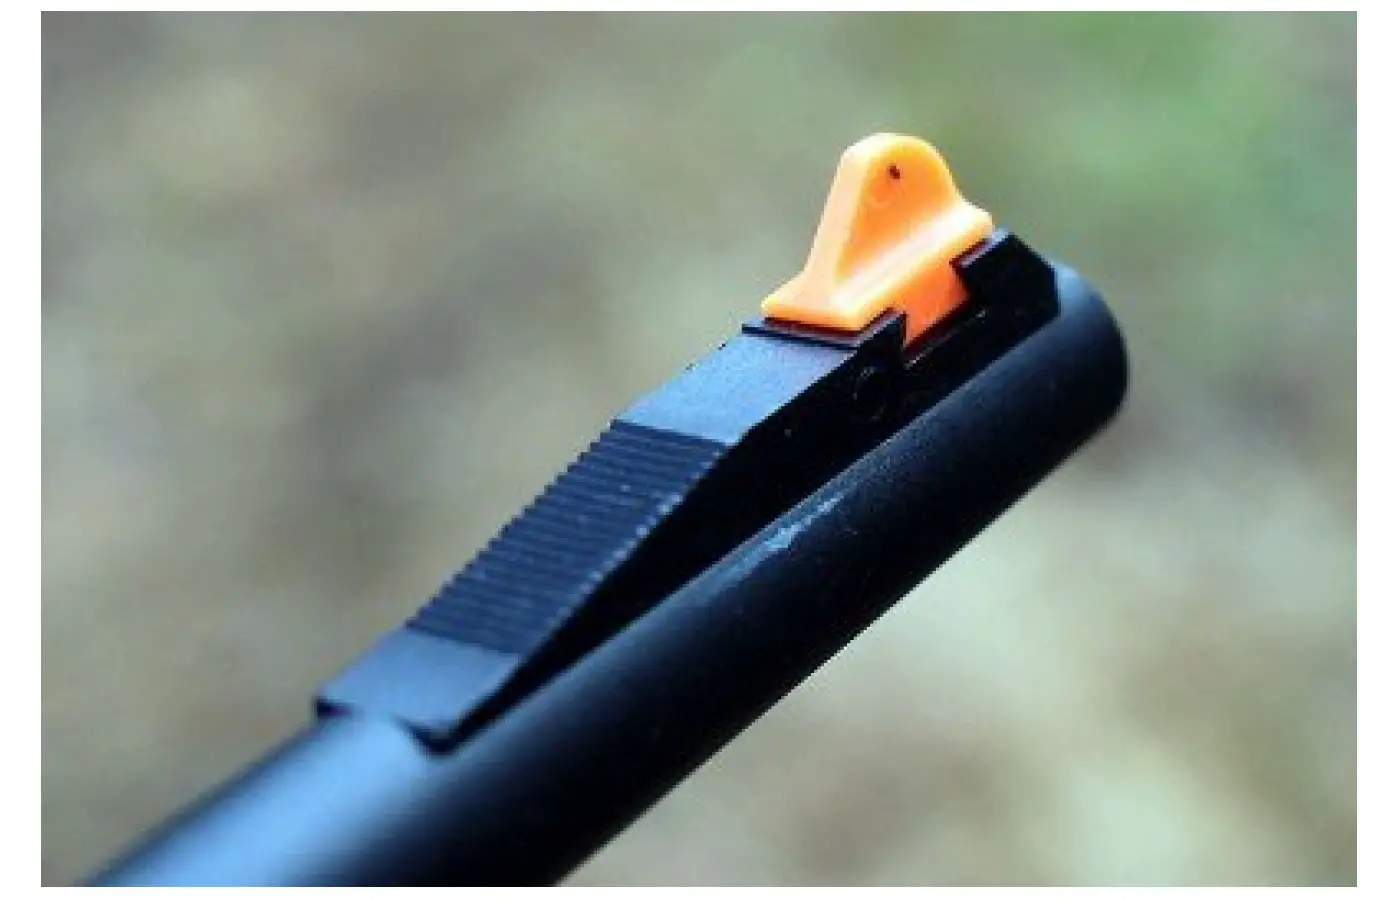 The bright orange front sight insert is dovetail secured and easily picks up the peep-style aperture in the rear.